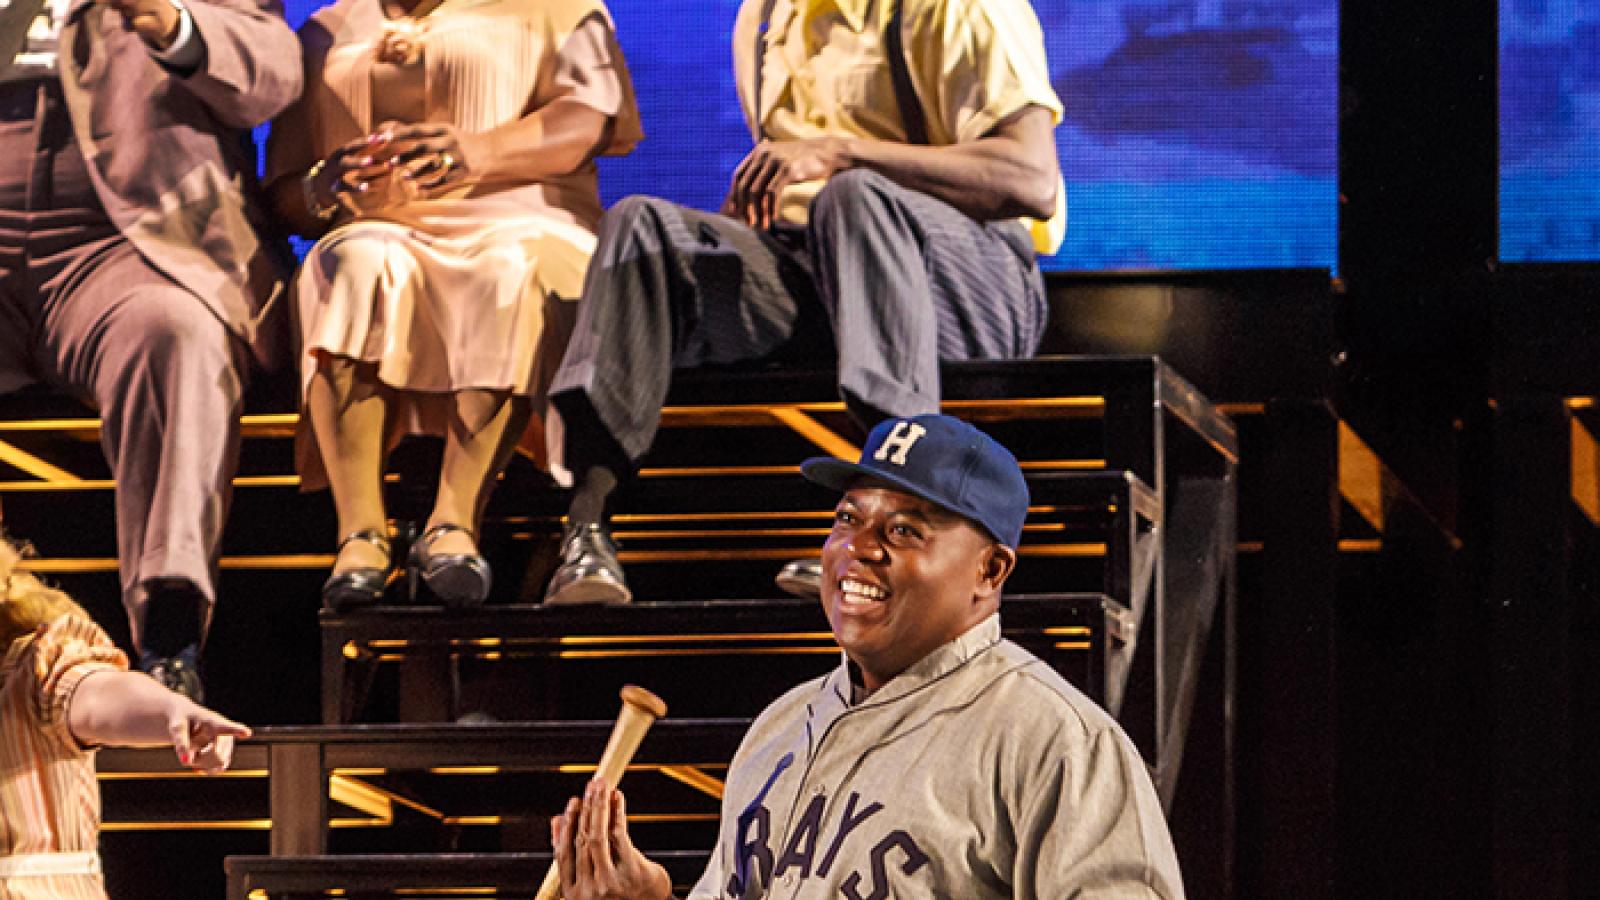 Man in baseball uniform holding a bat on stage. 